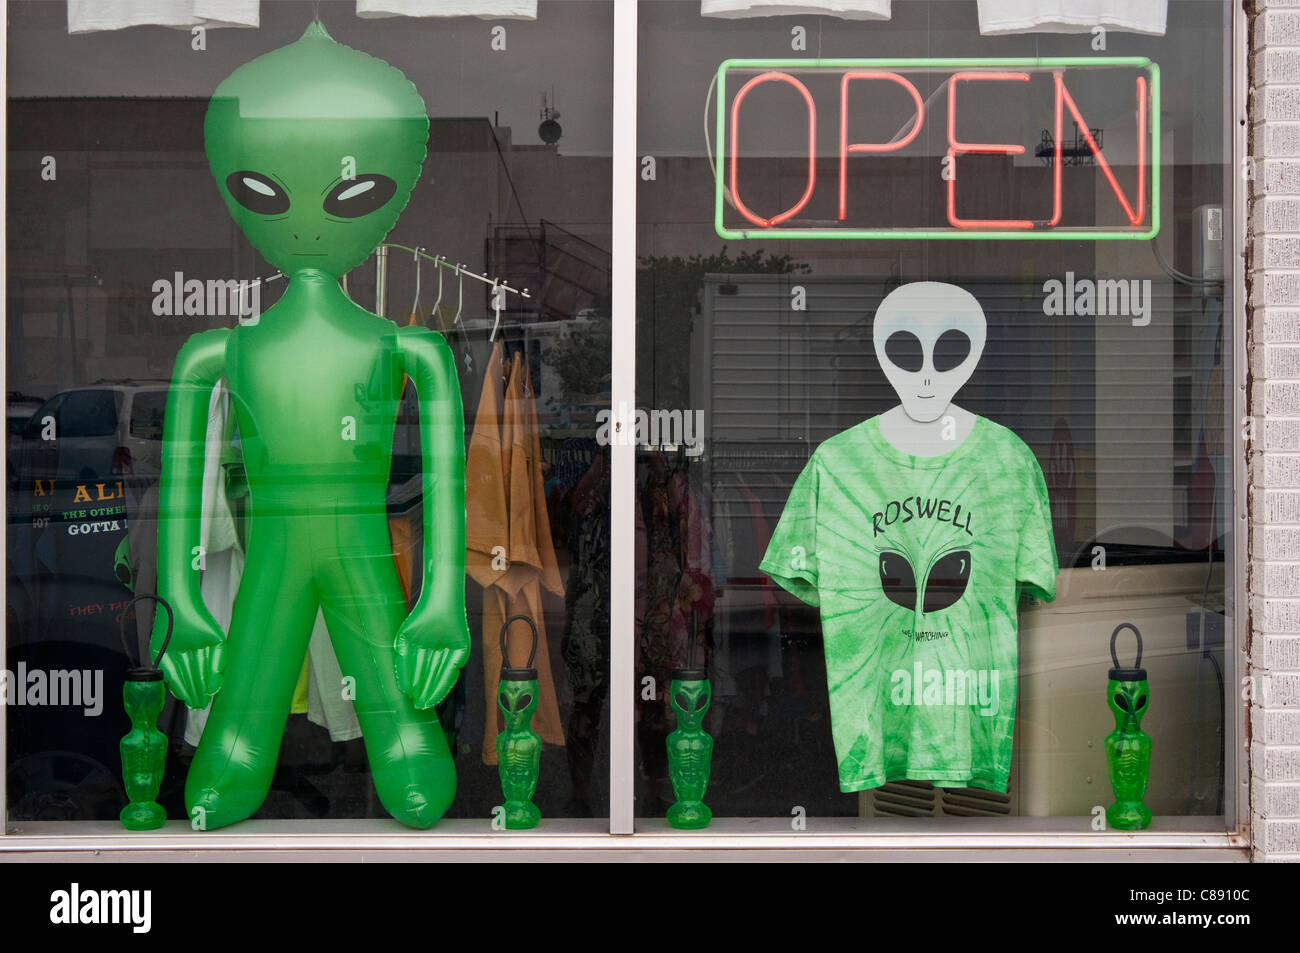 Geschenk-Shop in Roswell, New Mexico, USA Stockfoto